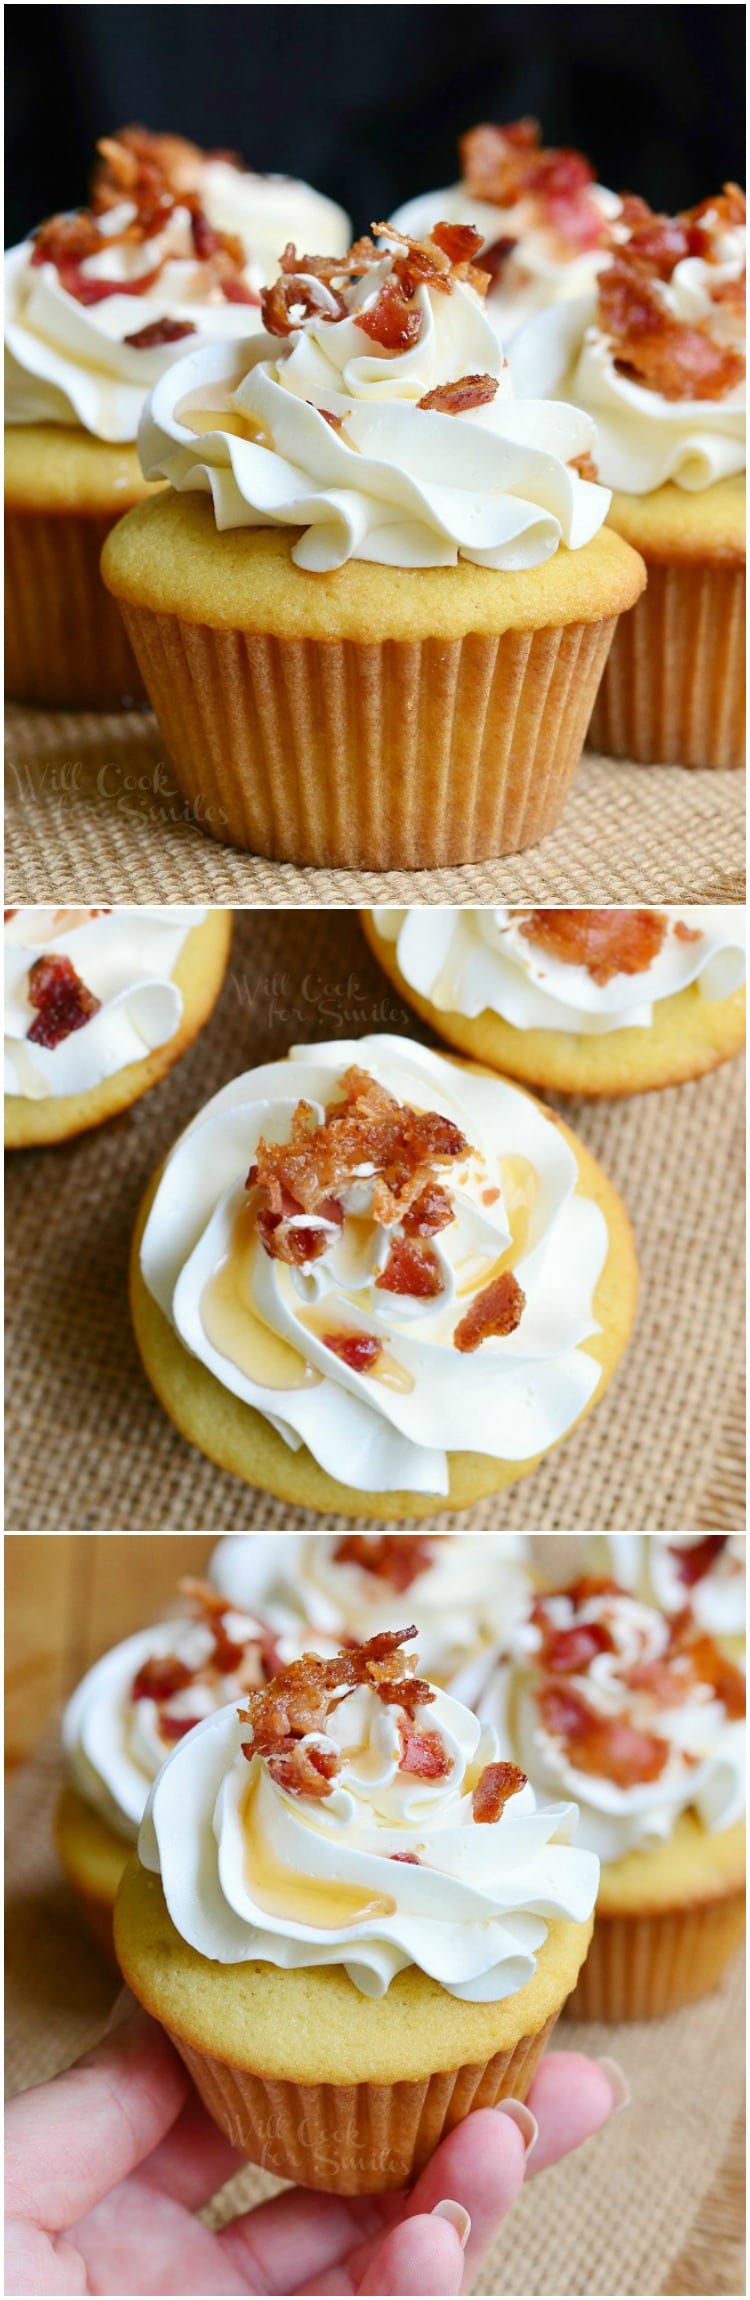 Maple Bacon Cupcakes with frosting and bacon crumbles on top collage 